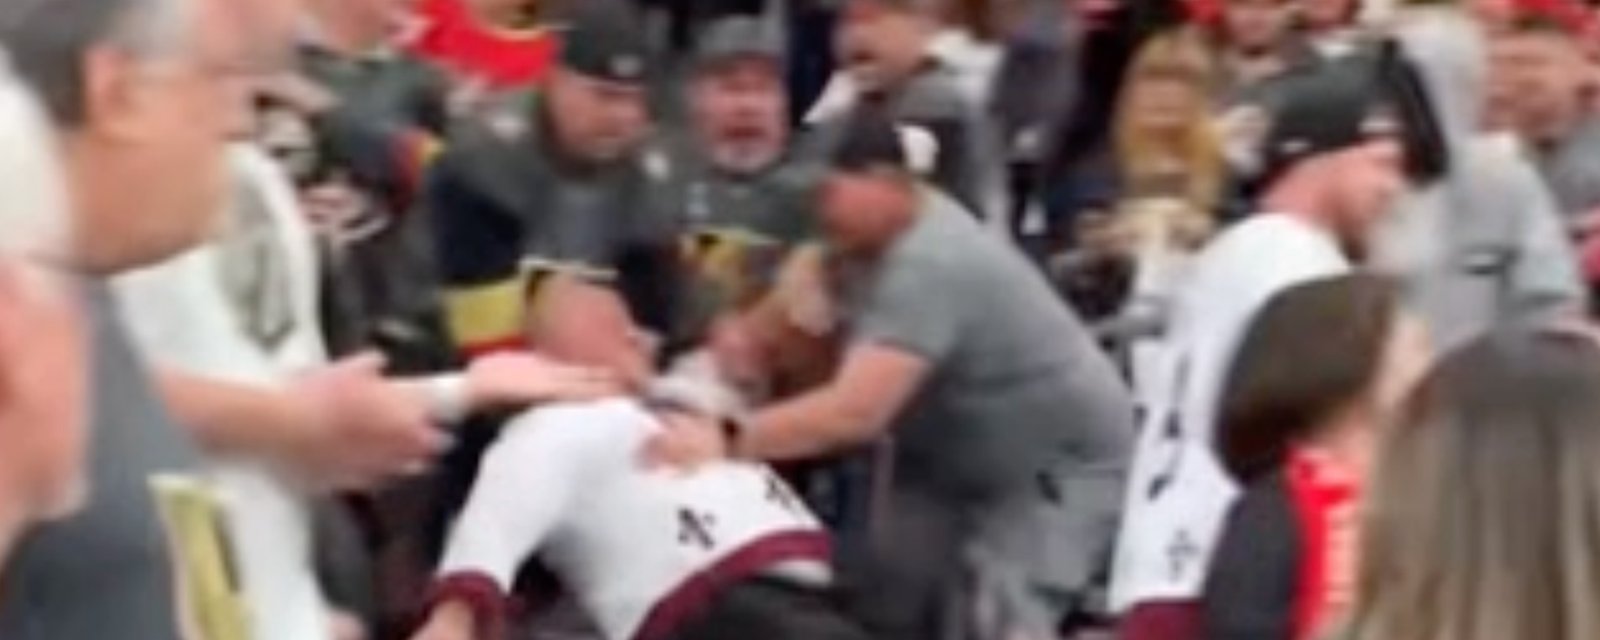 Fight breaks out in stands as Avs’ fans have gear stolen during Knights’ celebrations 